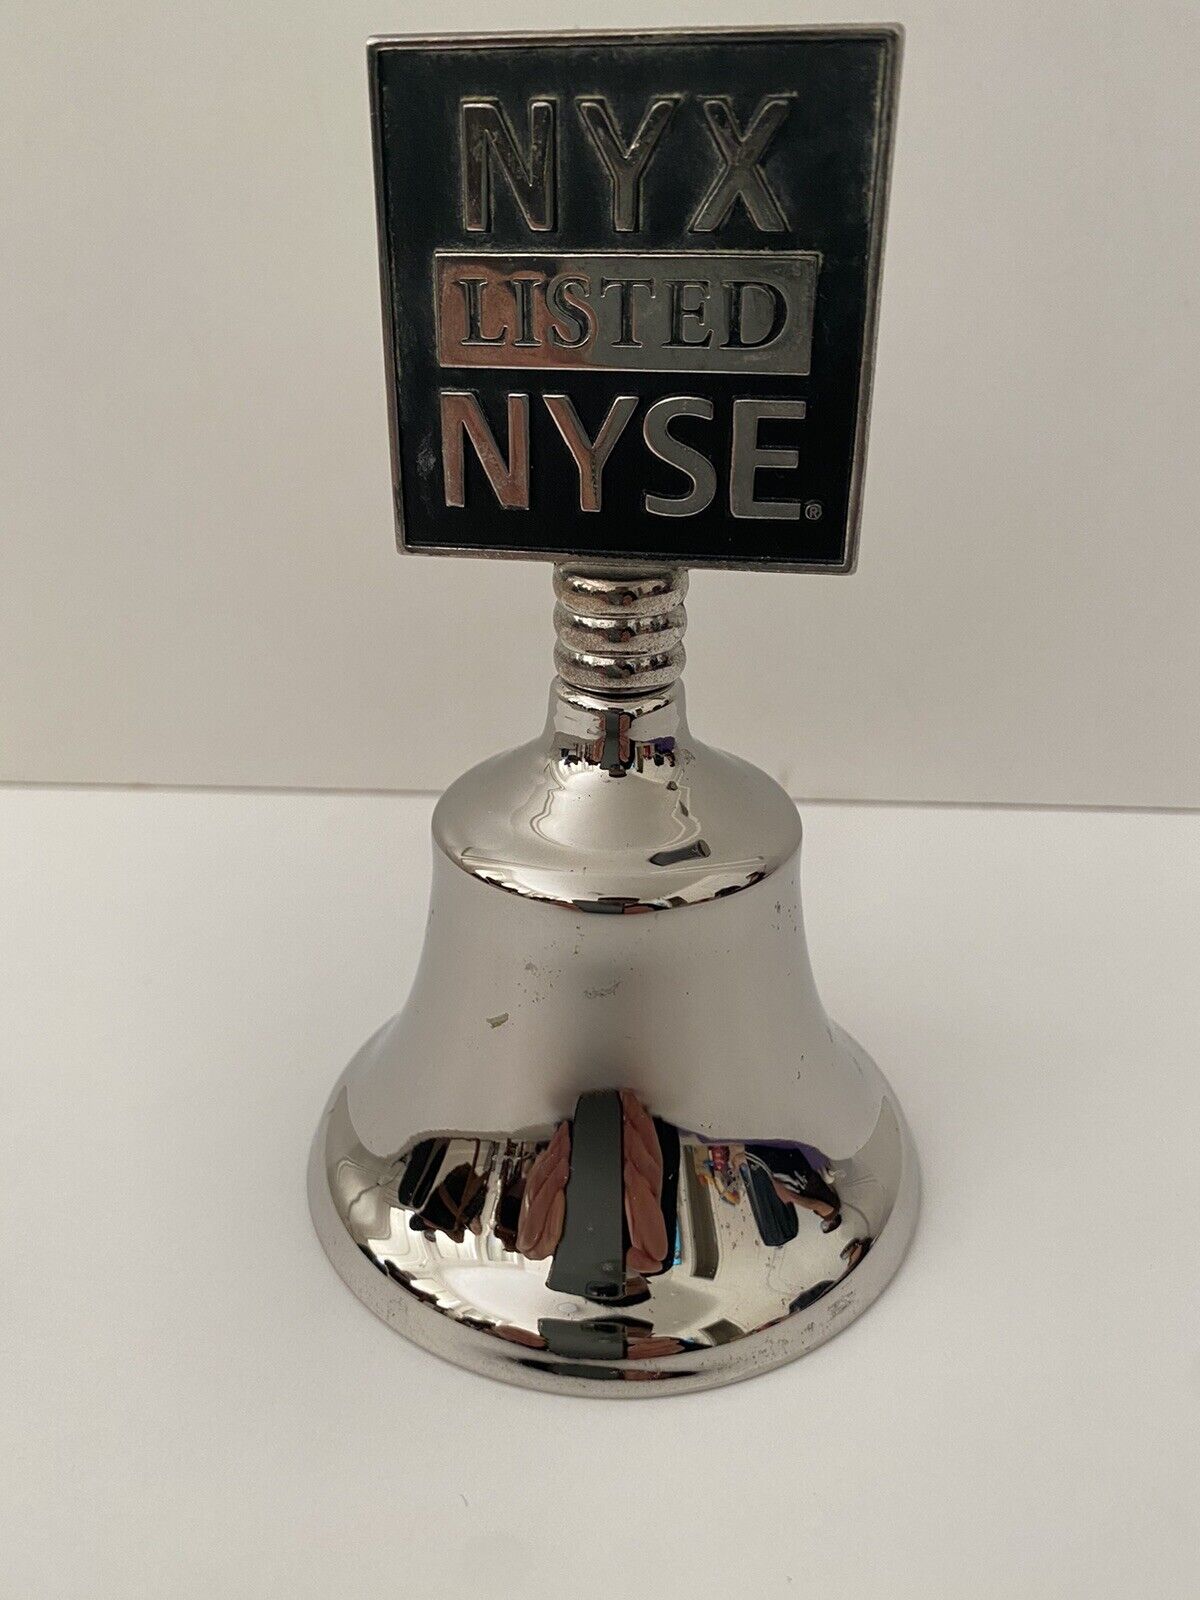 NYX Listed NYSE New York Stock Exchange Bell Wall Street NYC